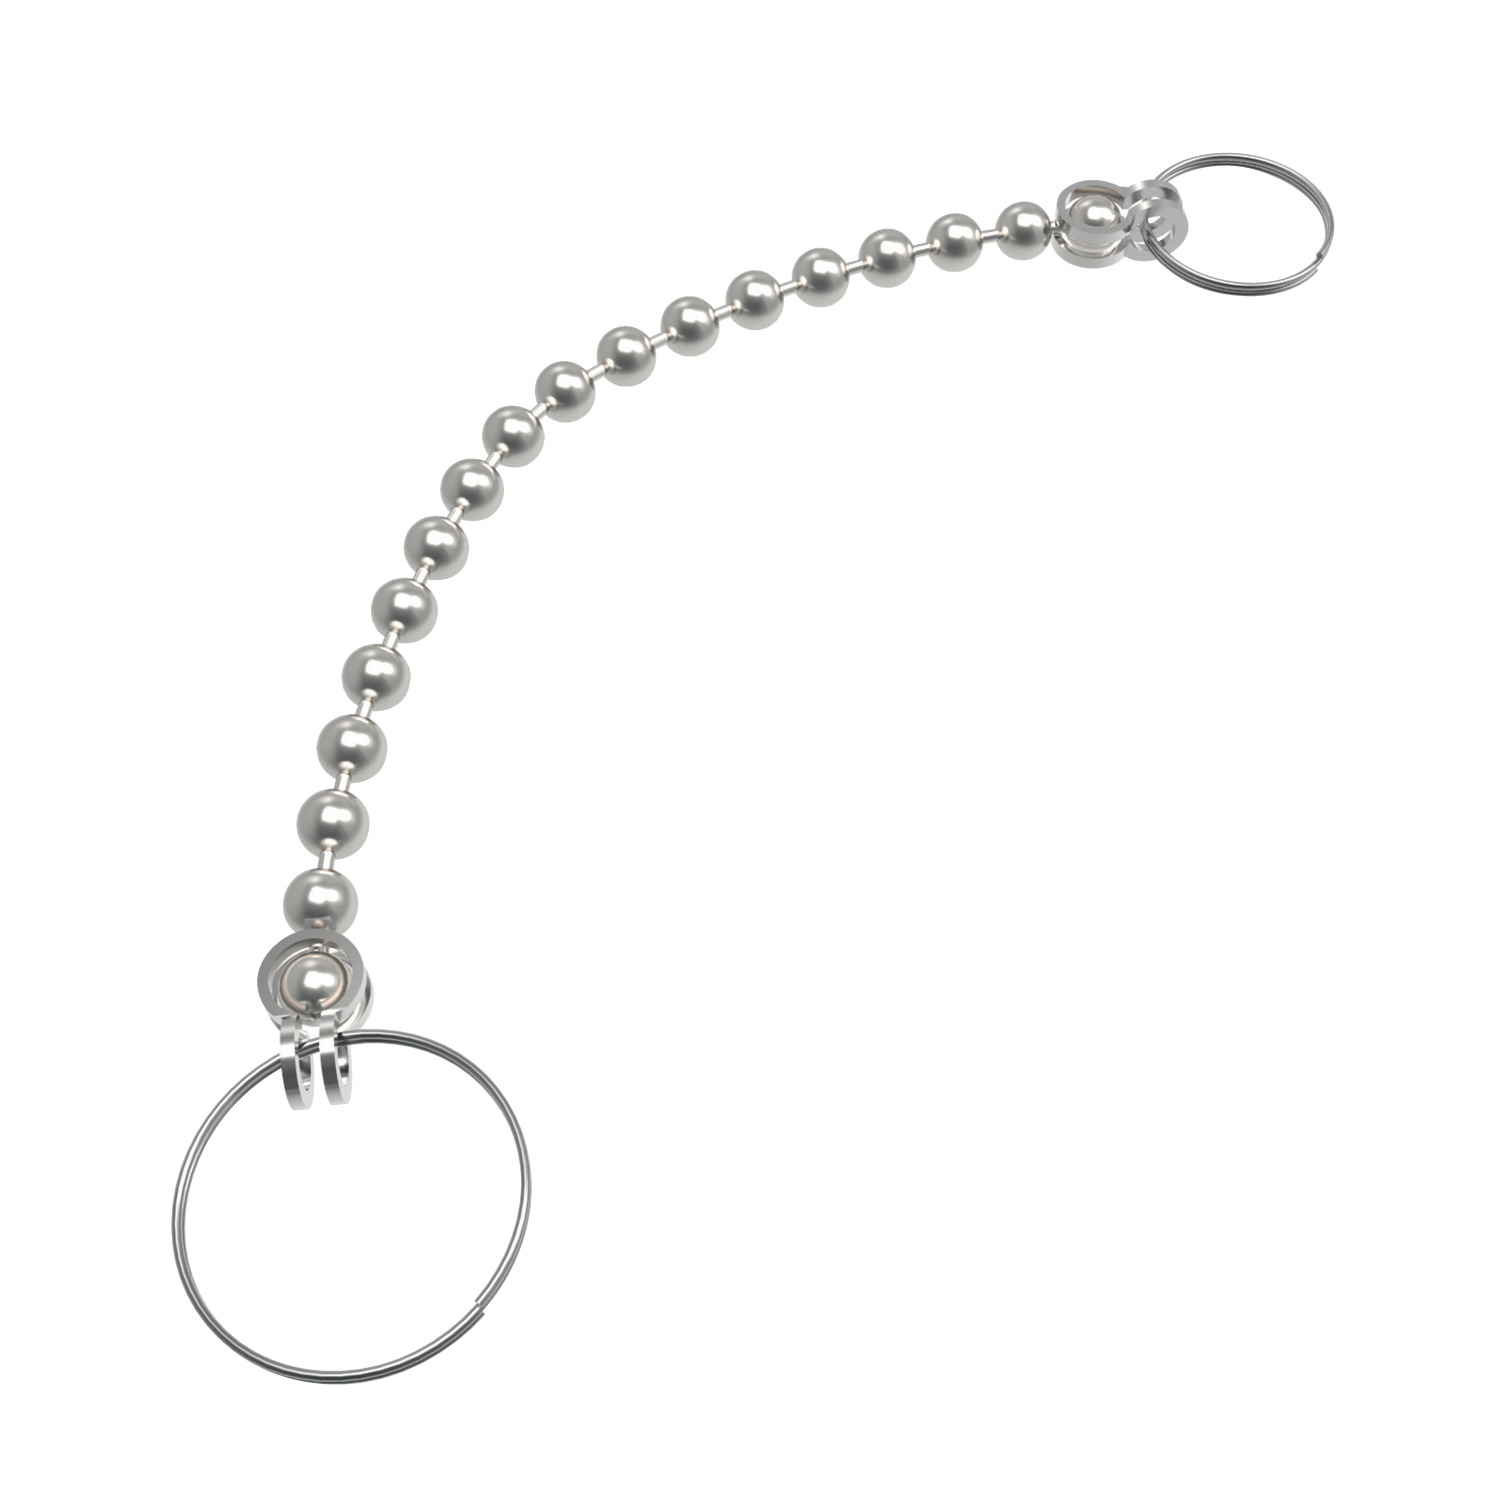 Product 33270, Retaining Bead Chain stainless steel / 